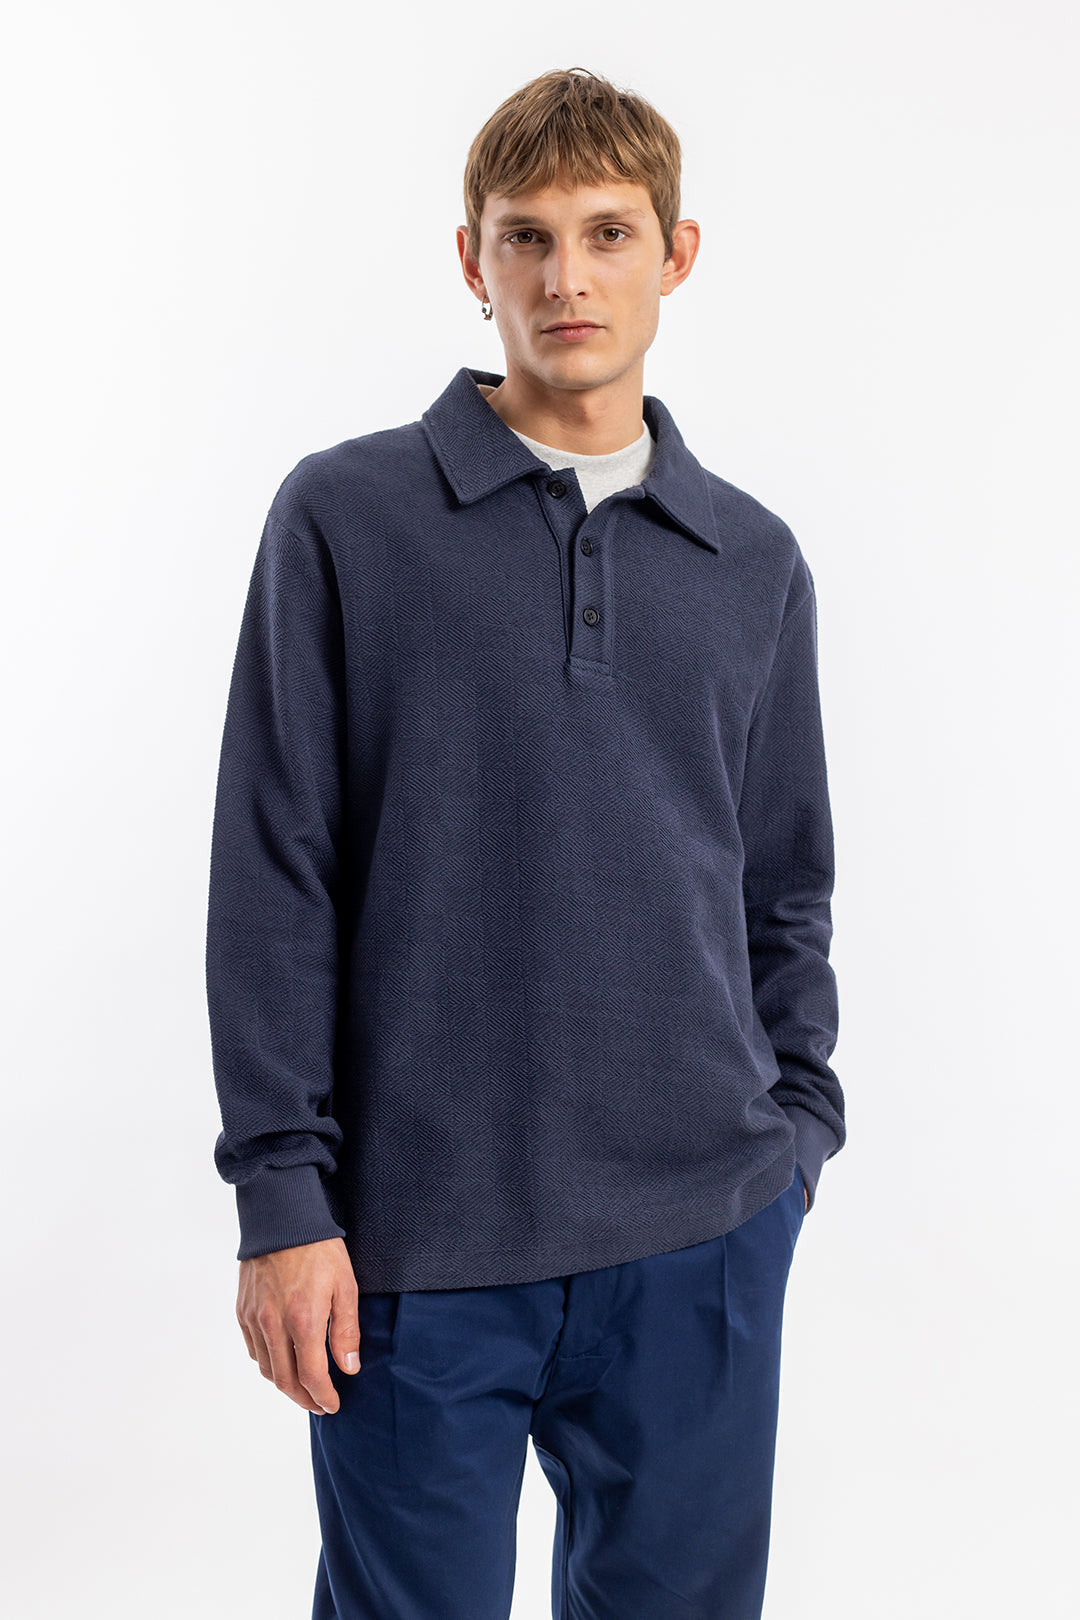 Dark blue, long-sleeved polo shirt made of organic cotton from Rotholz